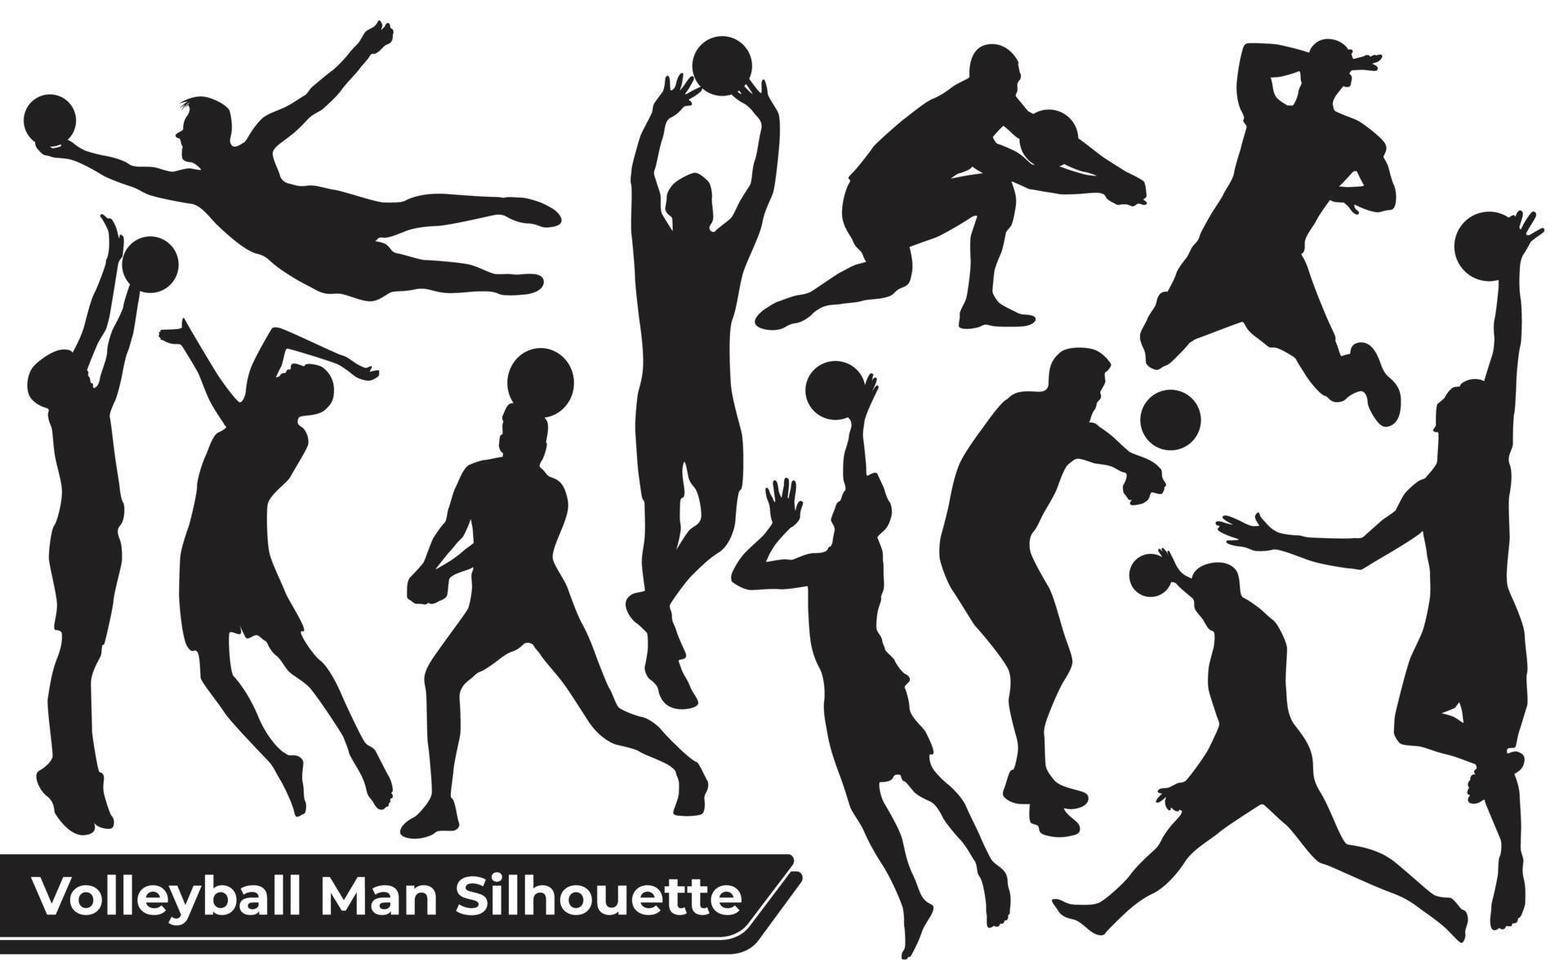 Collection of Volleyball Player Man silhouettes in different poses vector